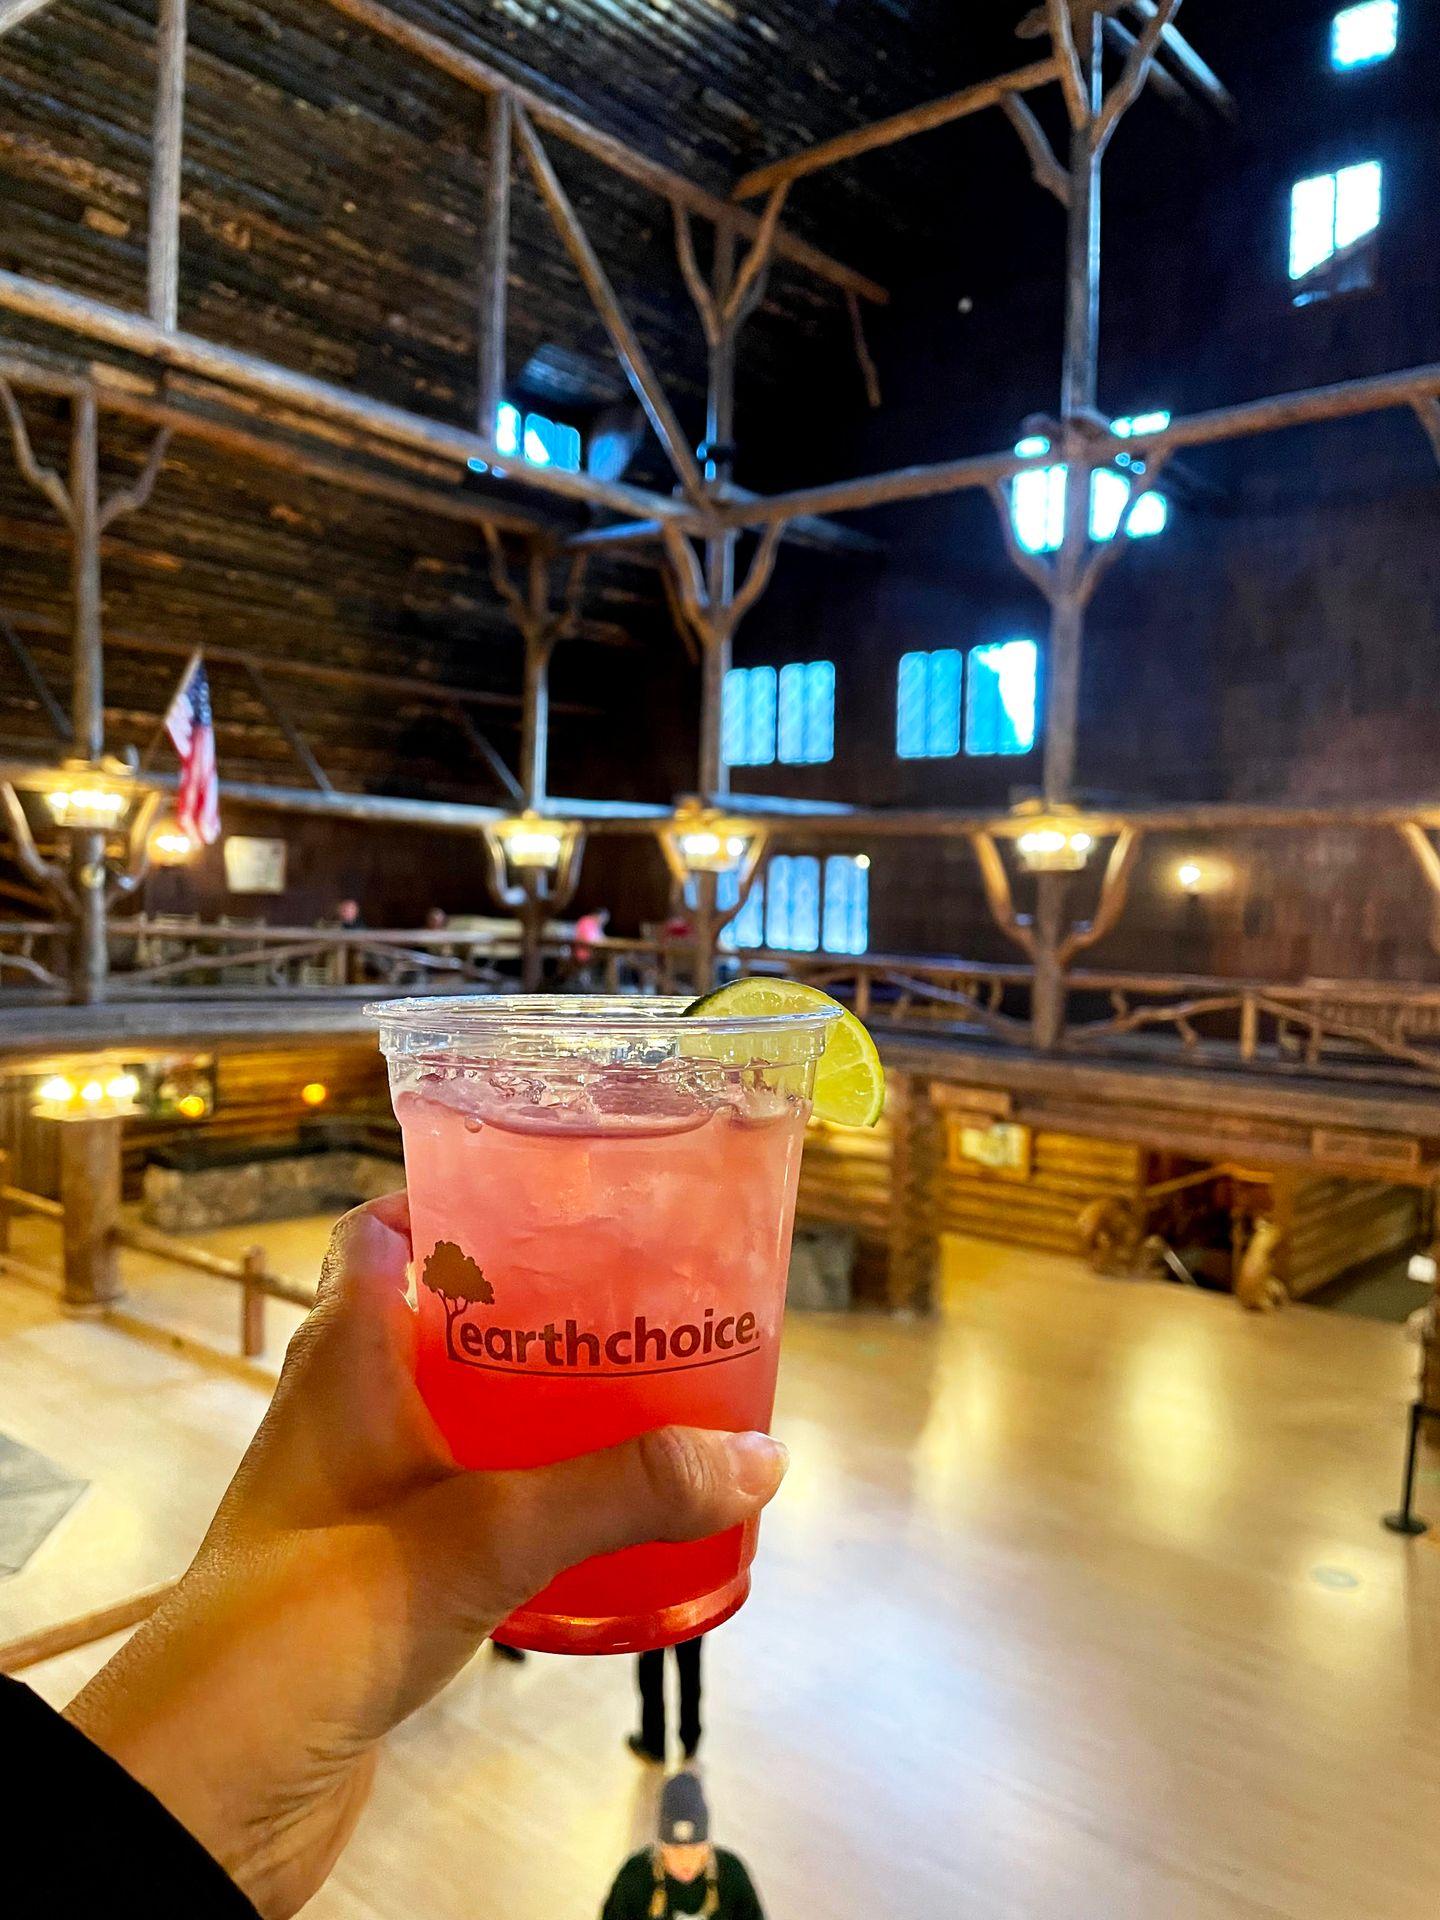 Holding up a cocktail inside of the Old Faithful Inn.